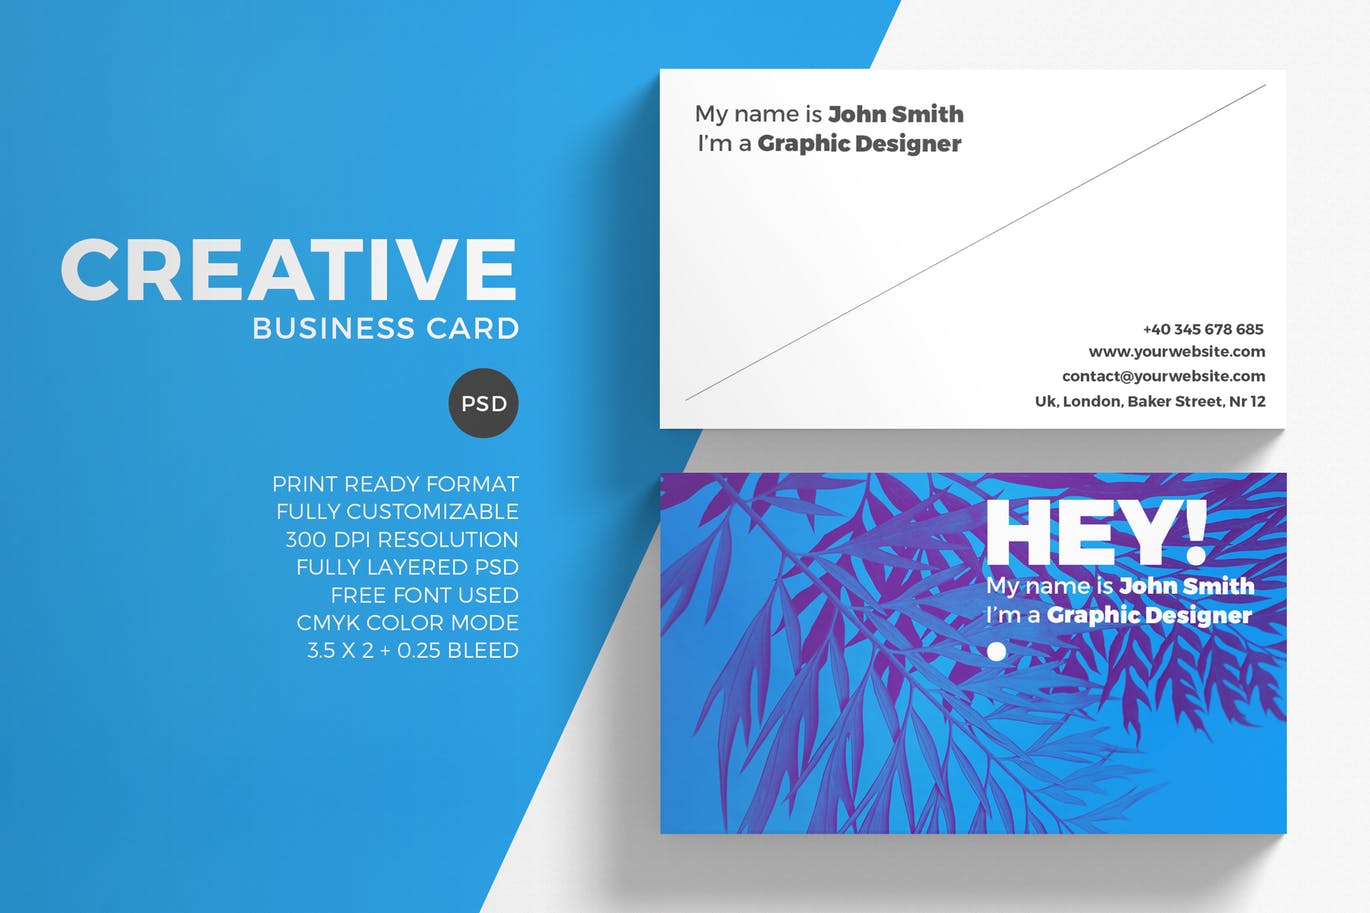 White and blue business card